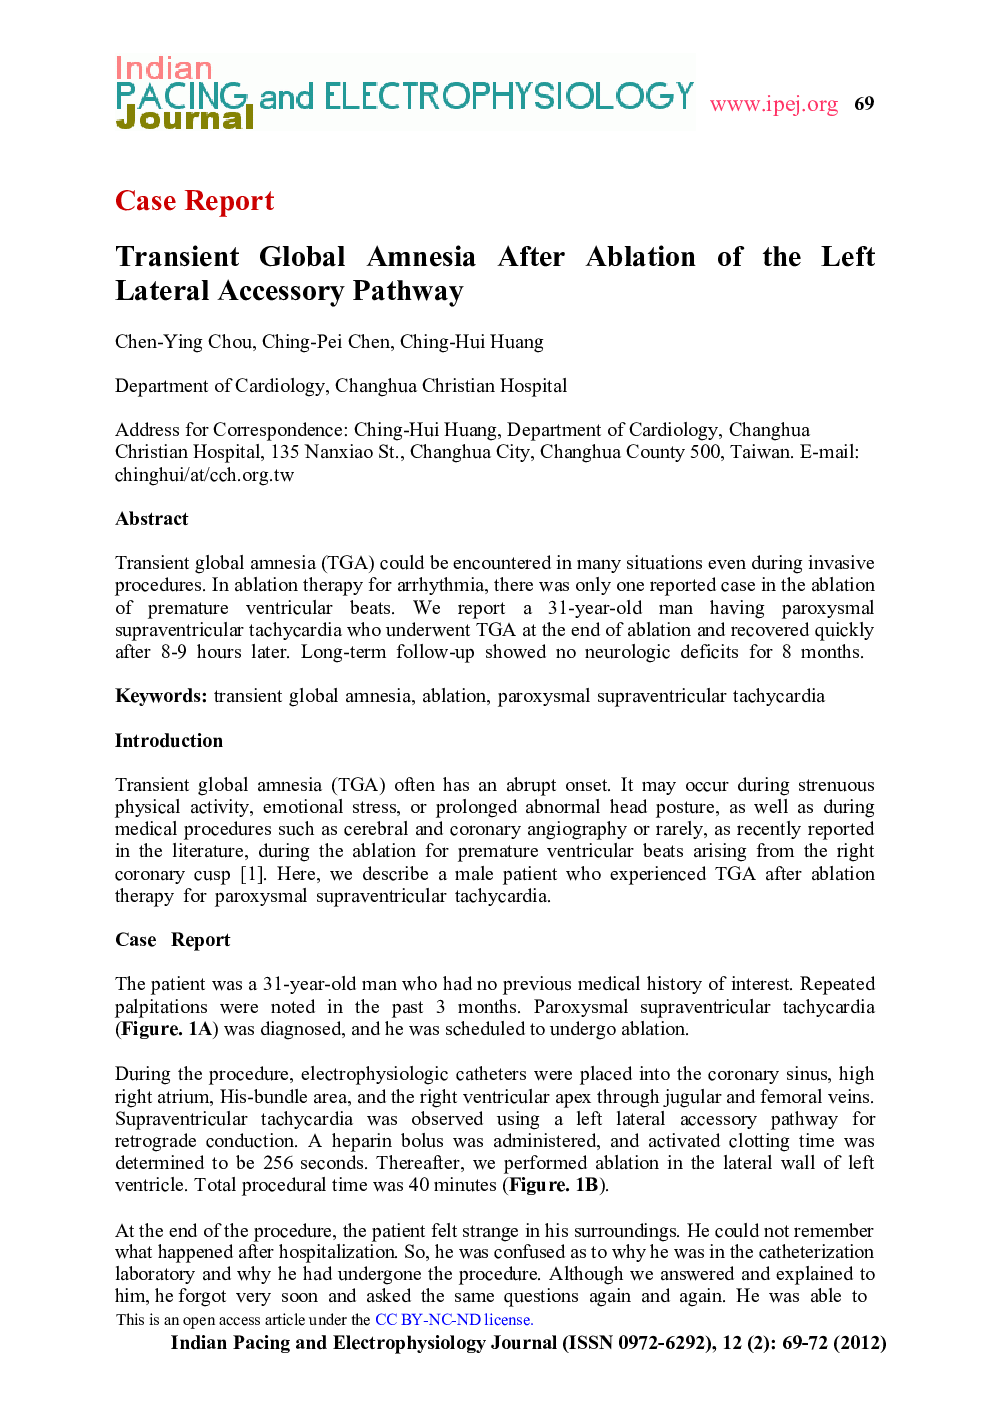 Transient Global Amnesia After Ablation of the Left Lateral Accessory Pathway